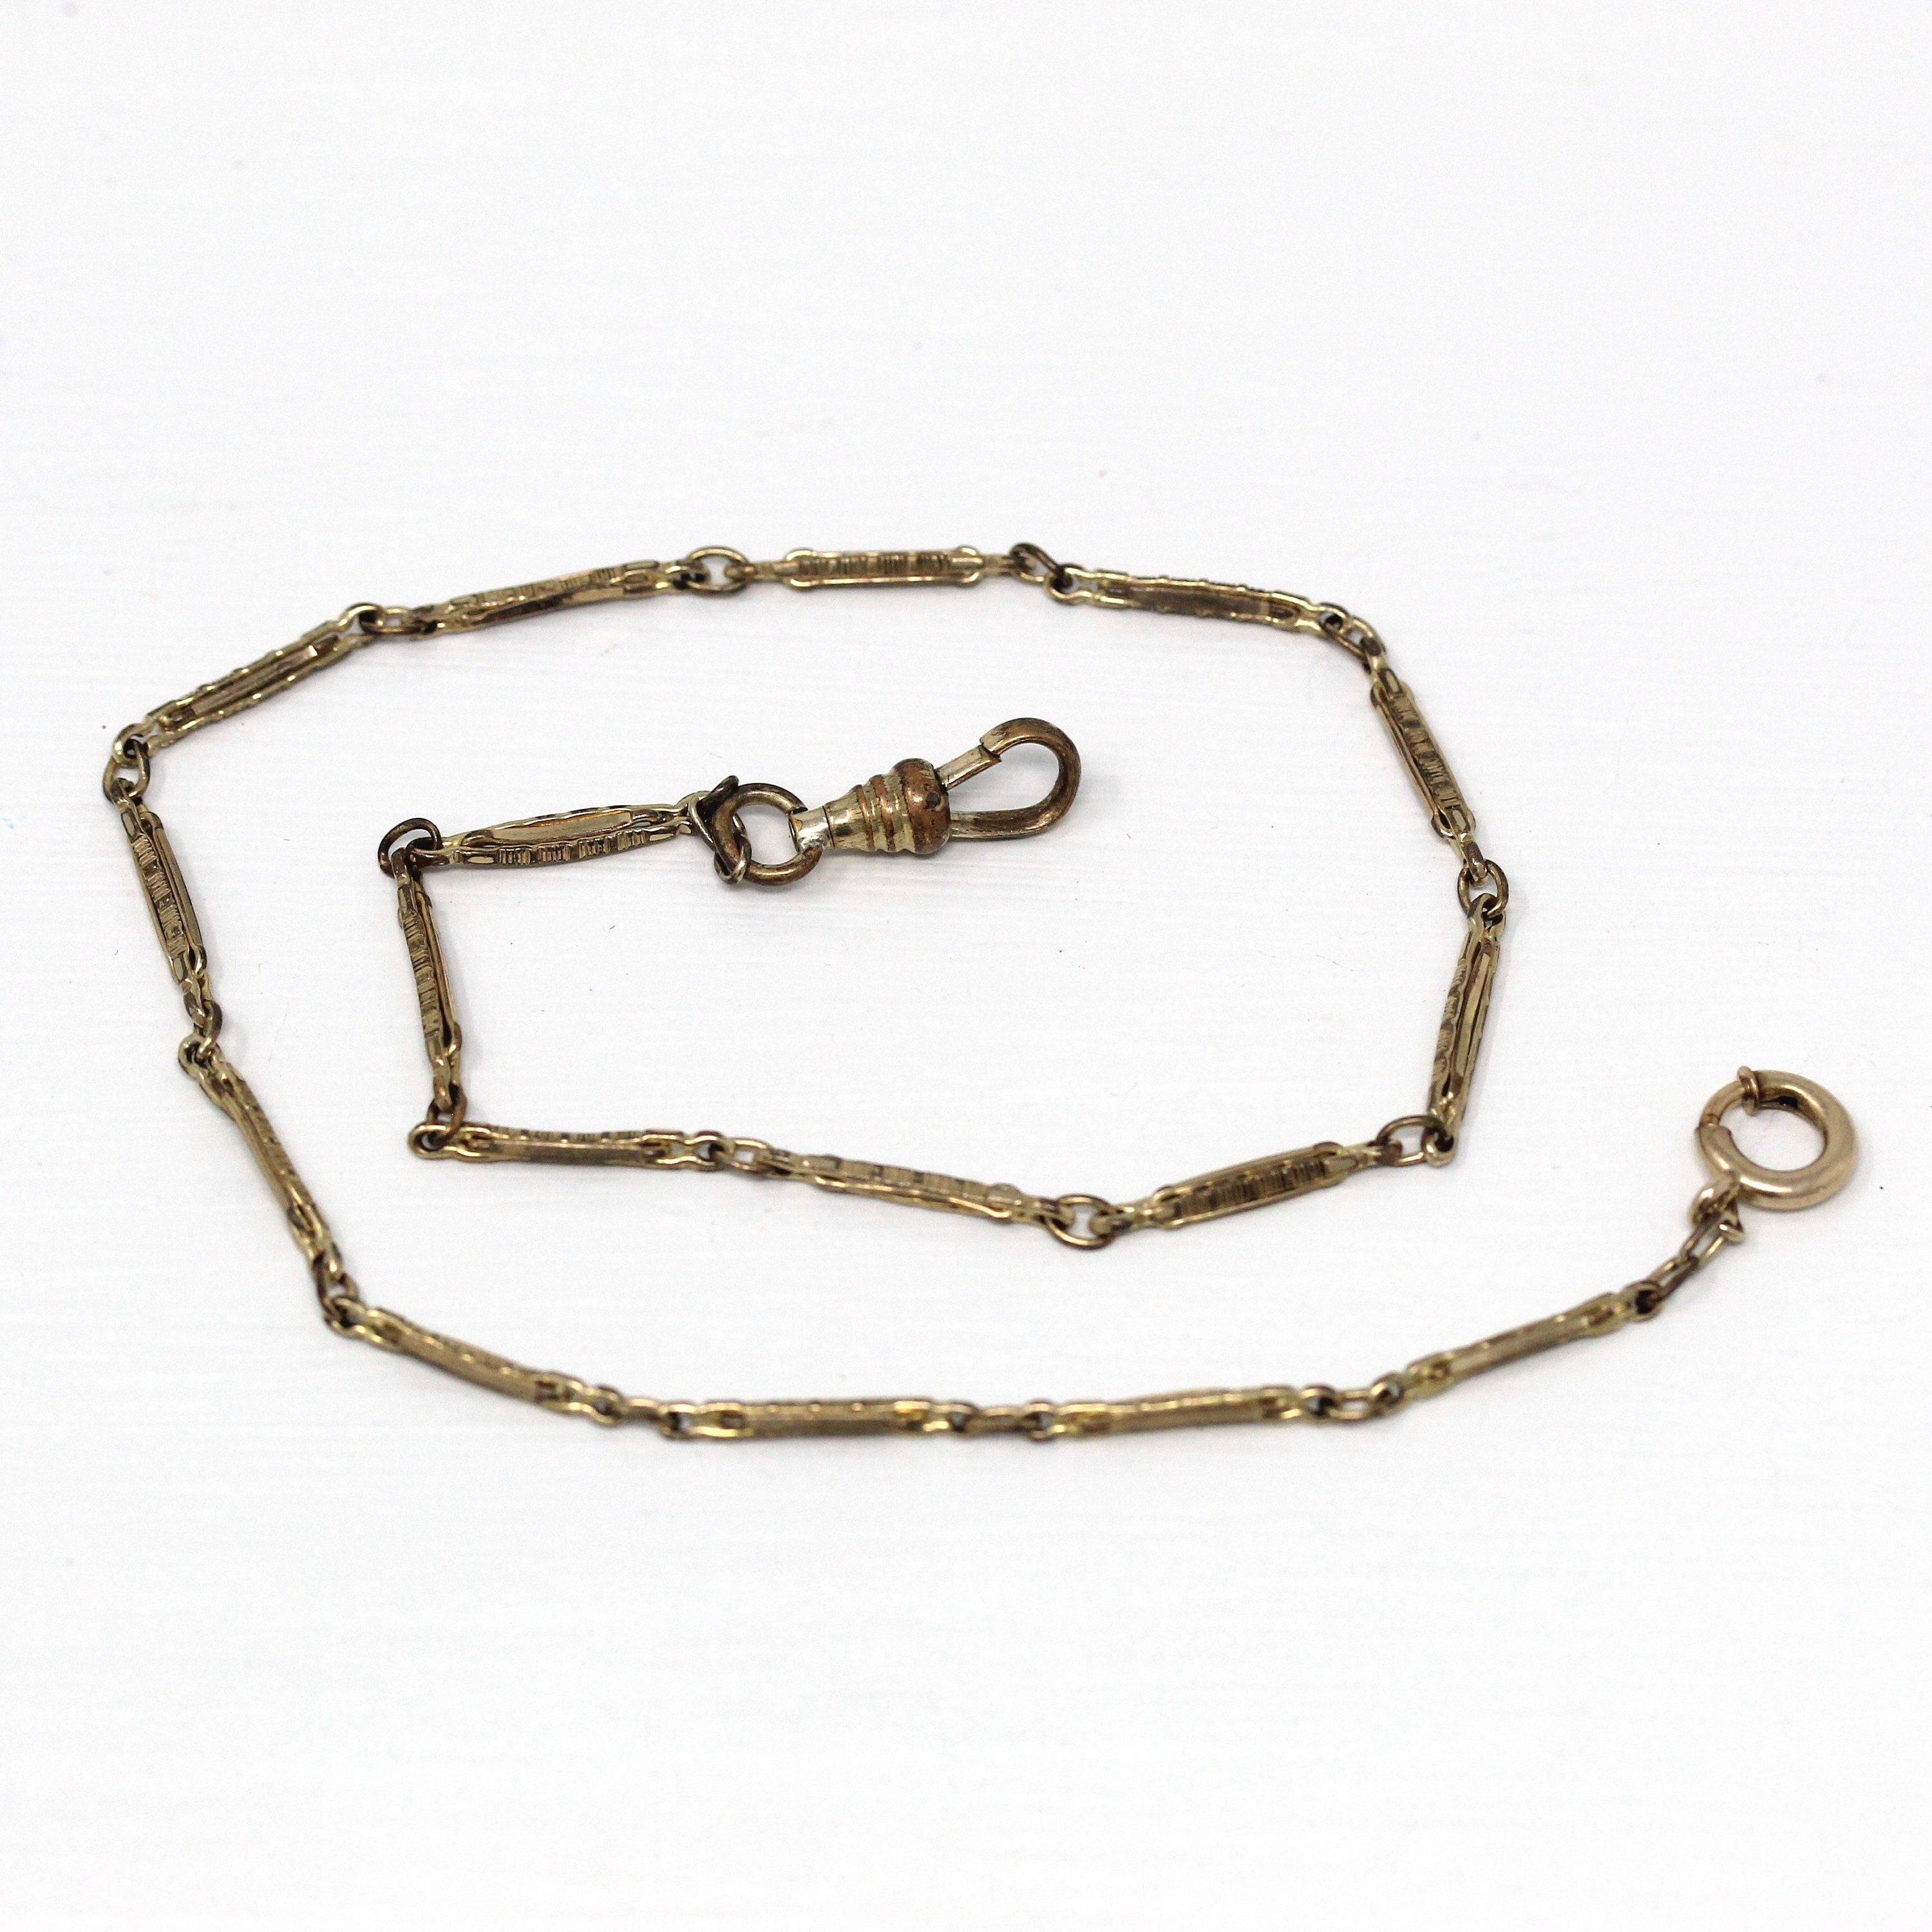 Antique 1900s gold filled vest clip pocket watch chain with carved